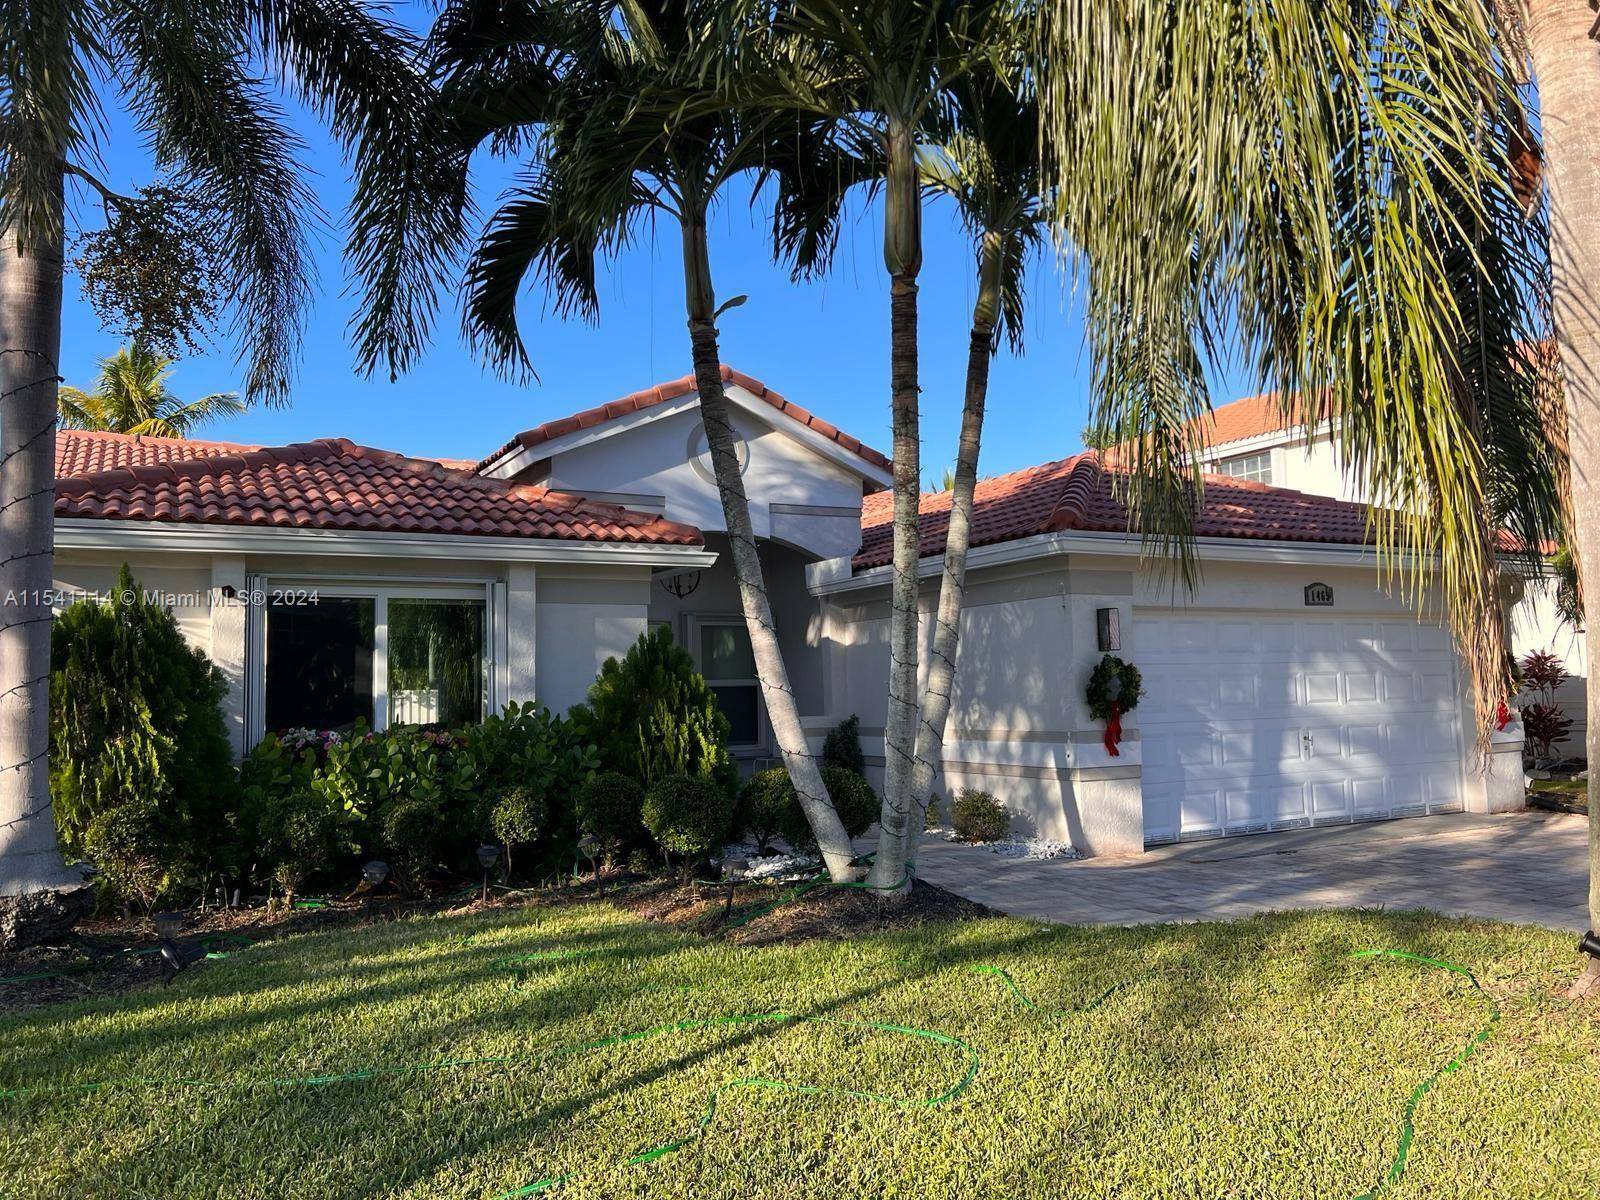 AMAZING 3 BEDROOMS 2 BATHS HOUSE, BEAUTIFULLY KEPT, WITH CALIFORNIA CLOSETS, ELECTRIC FIREPLACE, FULLY FENCED PATIO WITH POOL AND JACUZZI.